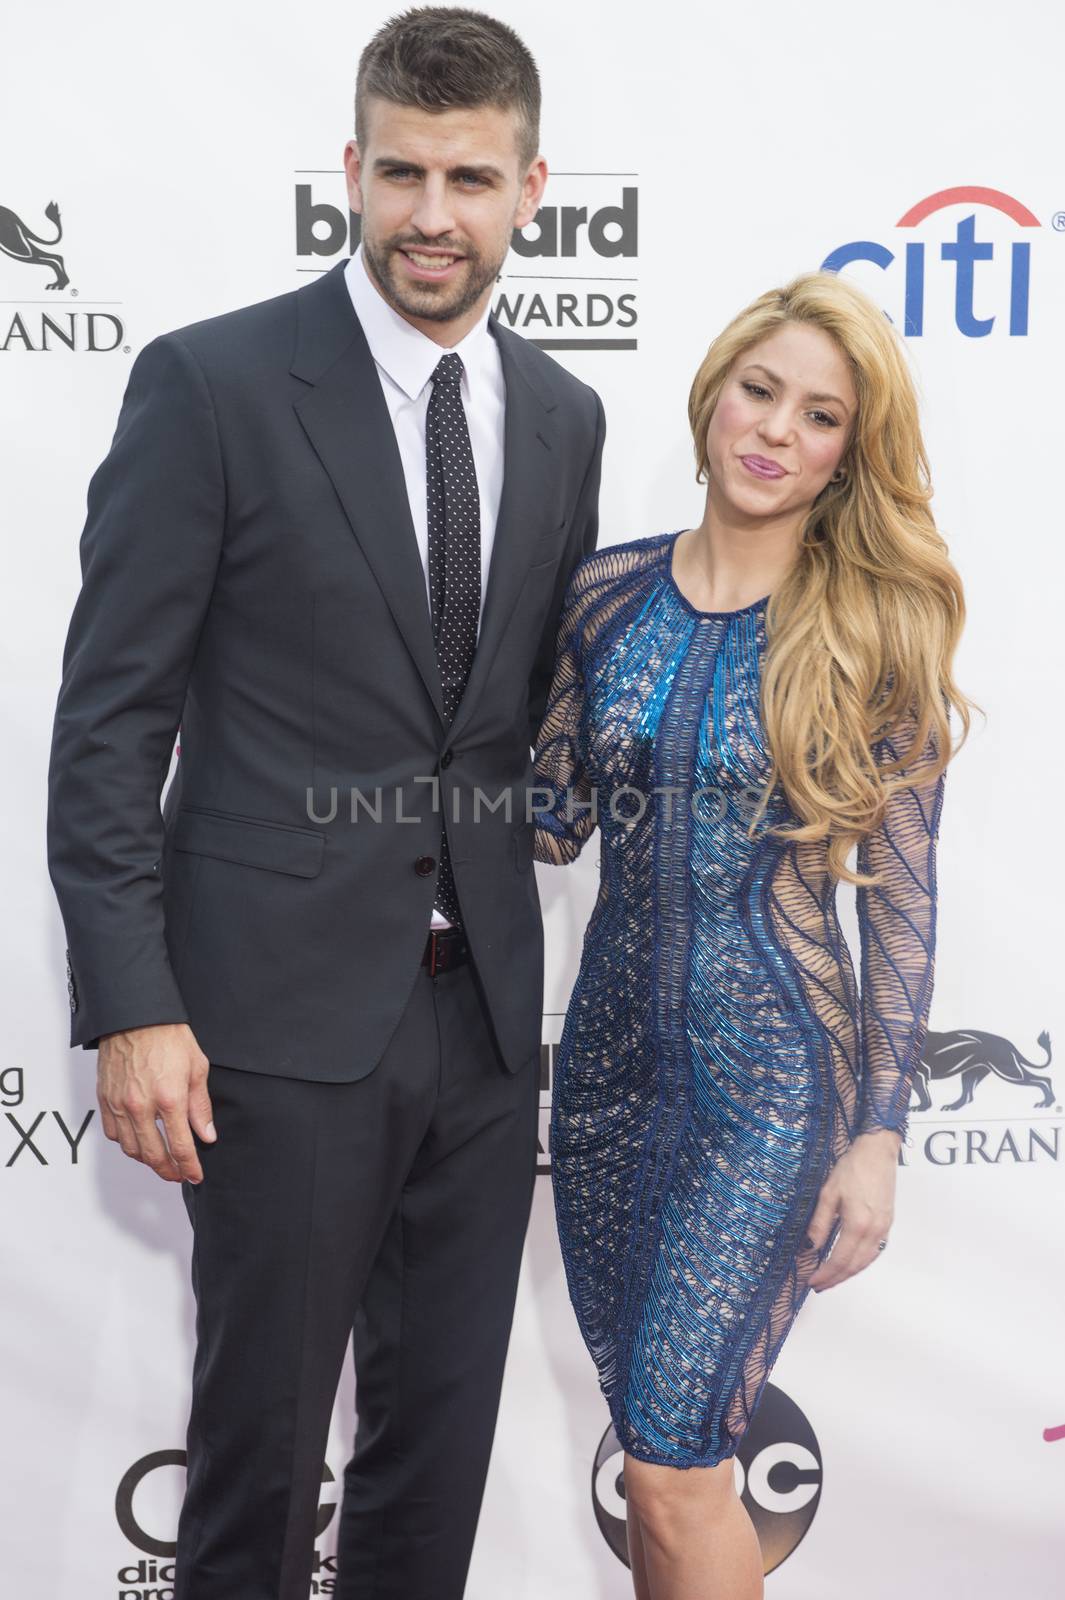 LAS VEGAS - MAY 18 : Soccer player Gerard Pique (L) and recording artist Shakira attend the 2014 Billboard Music Awards at the MGM Grand Garden Arena on May 18 , 2014 in Las Vegas.